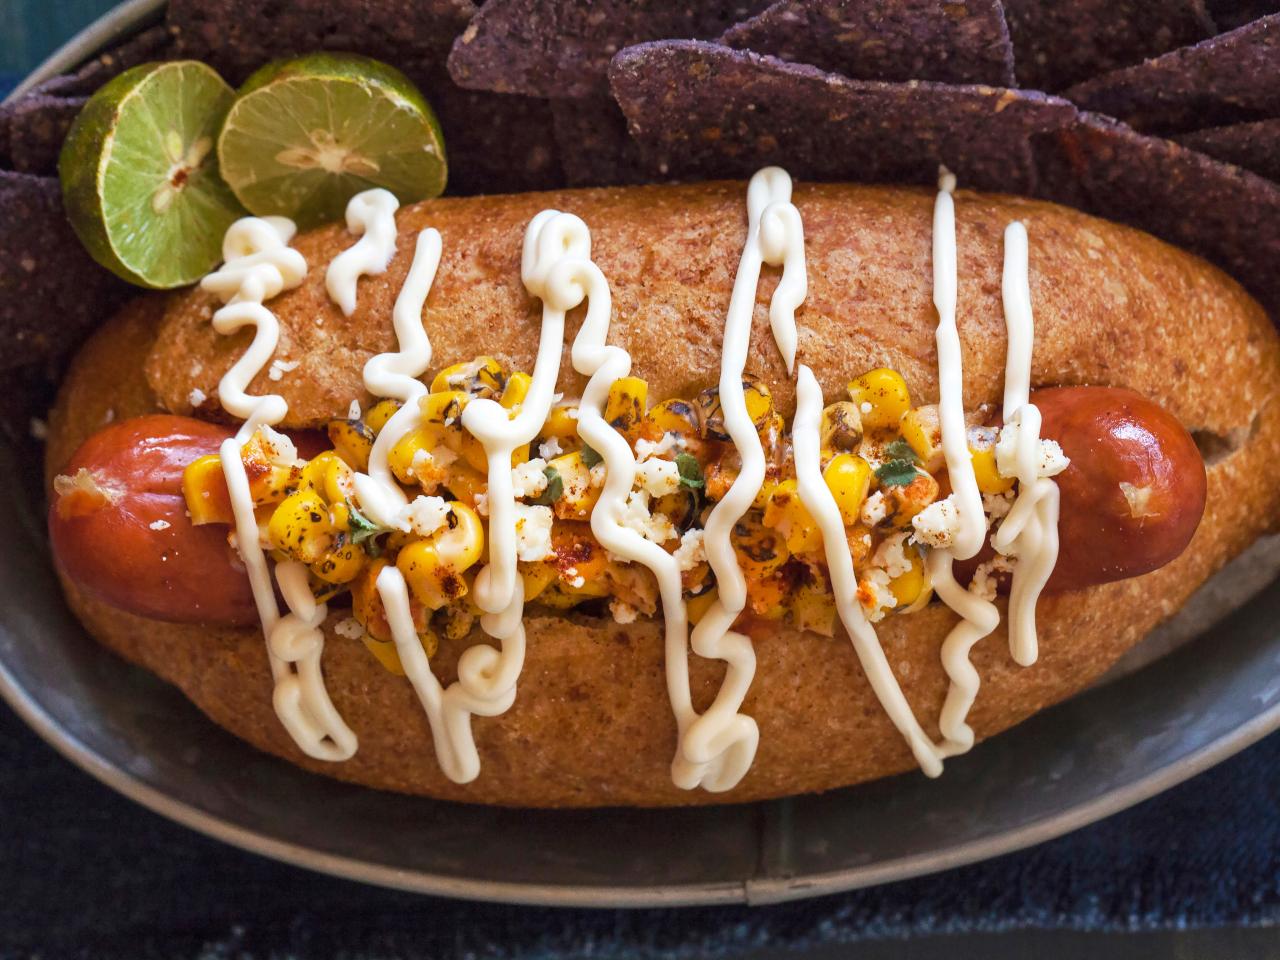 Four Ways to Dress up Your Hot Dog for an Over-the-Top Fourth